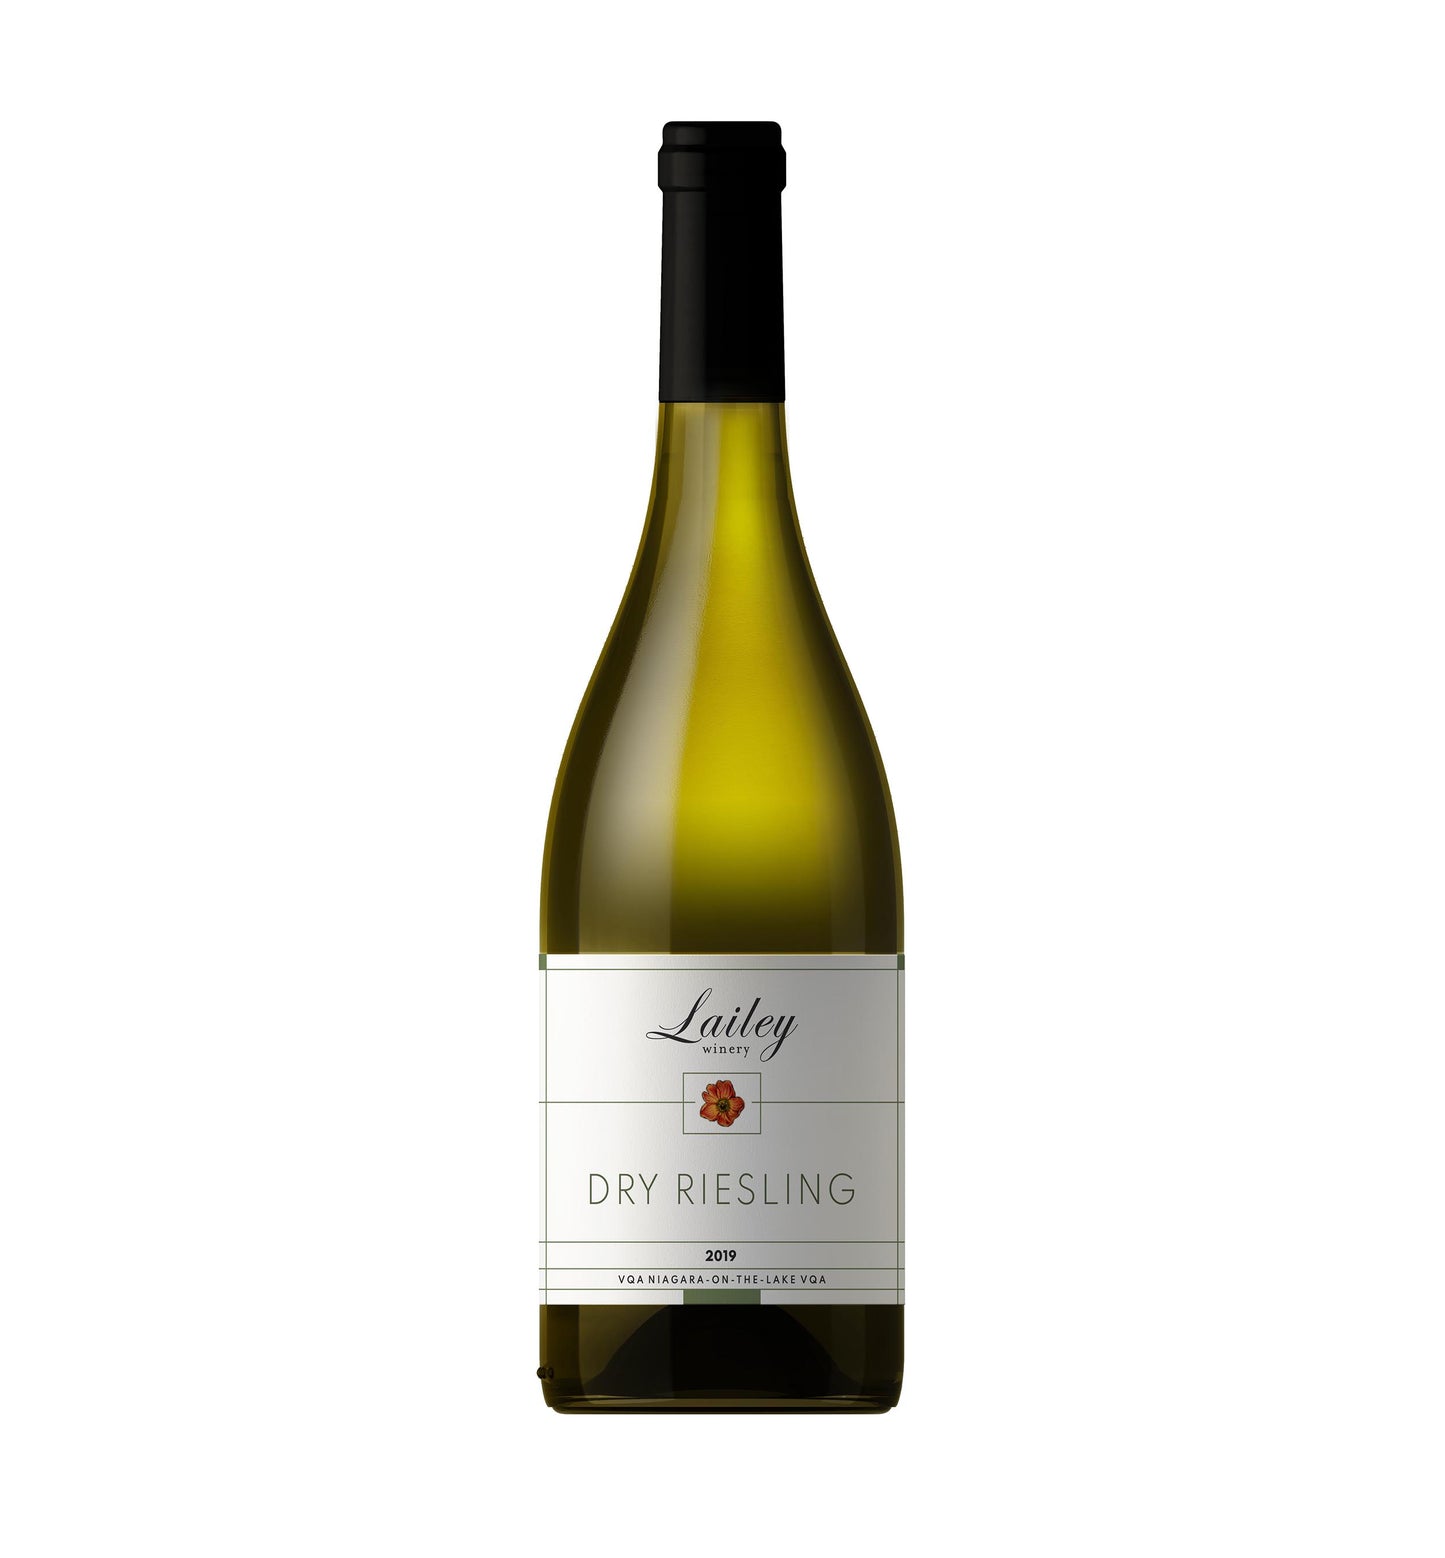 2019 Lailey Dry Riesling